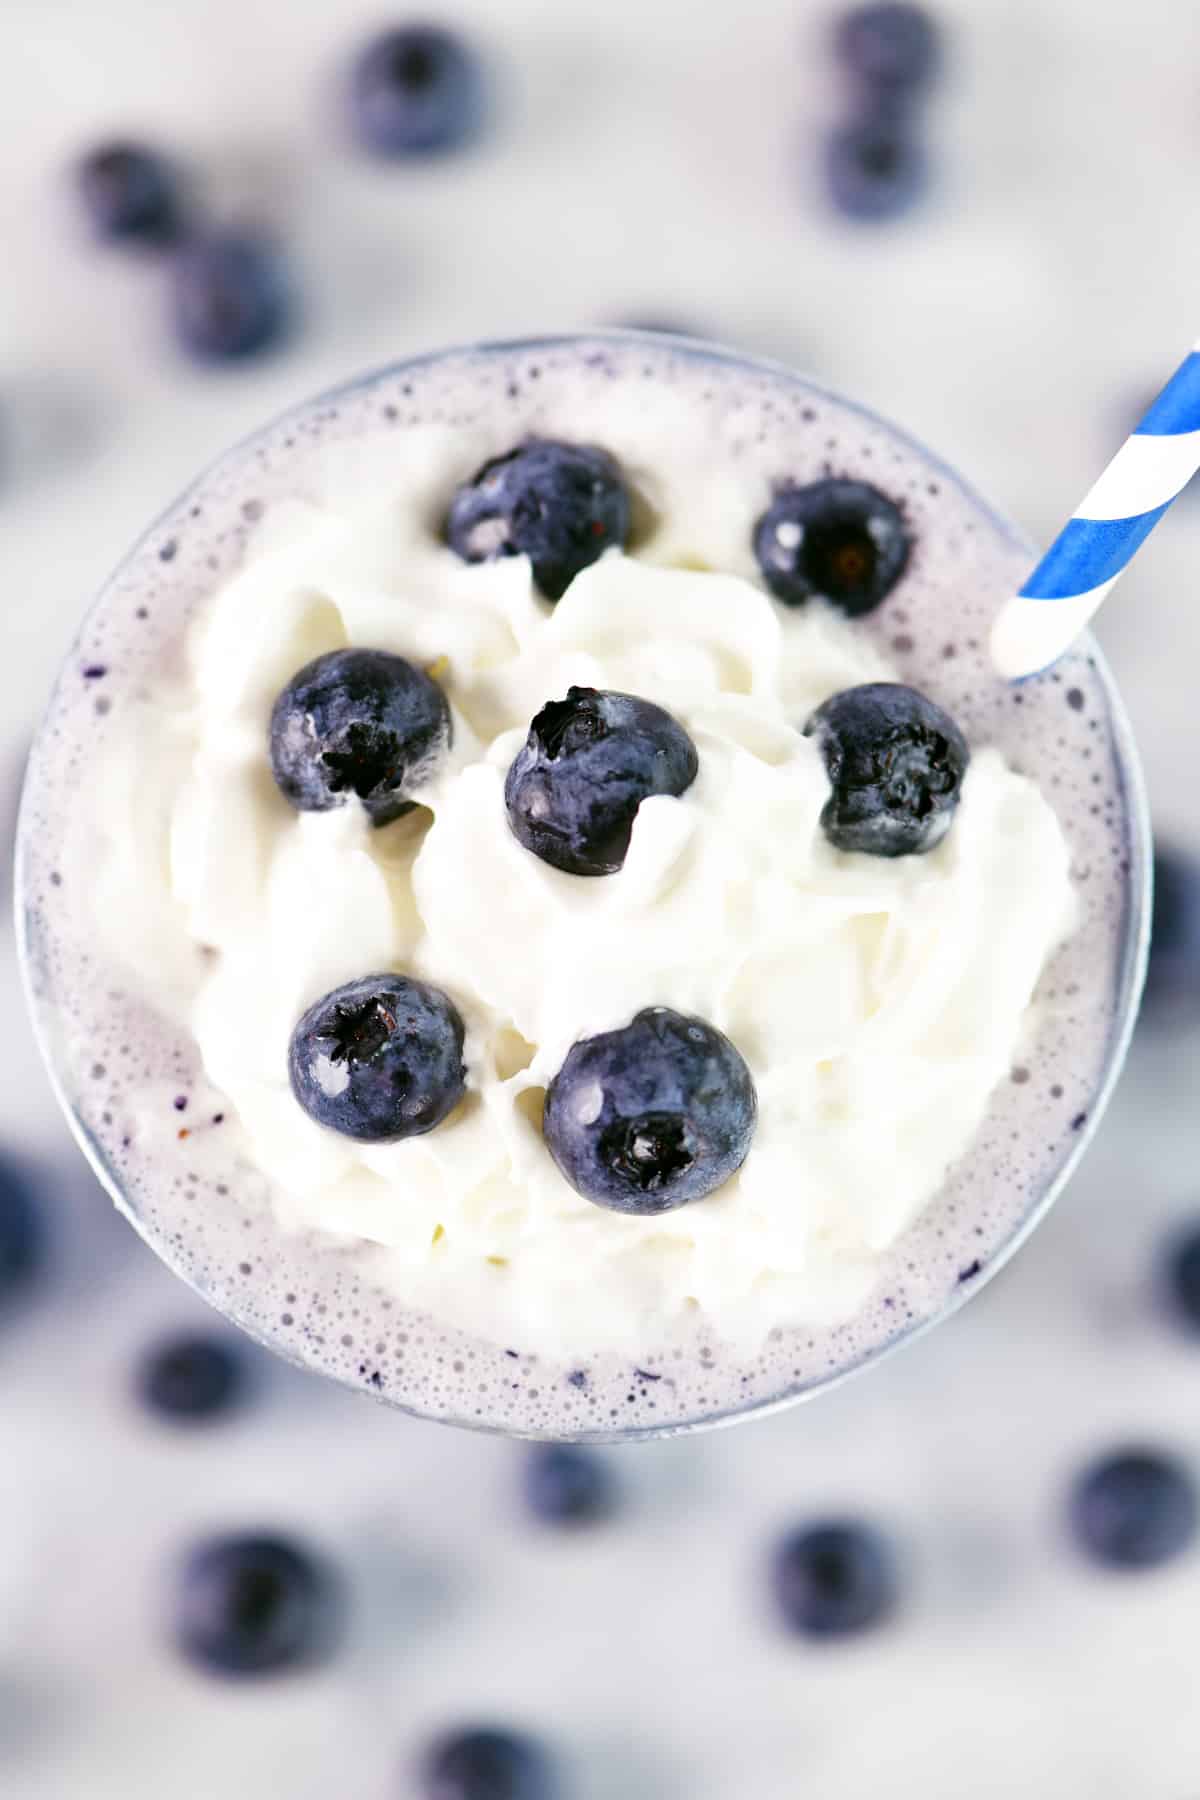 Whipped cream on top with fresh blueberries.